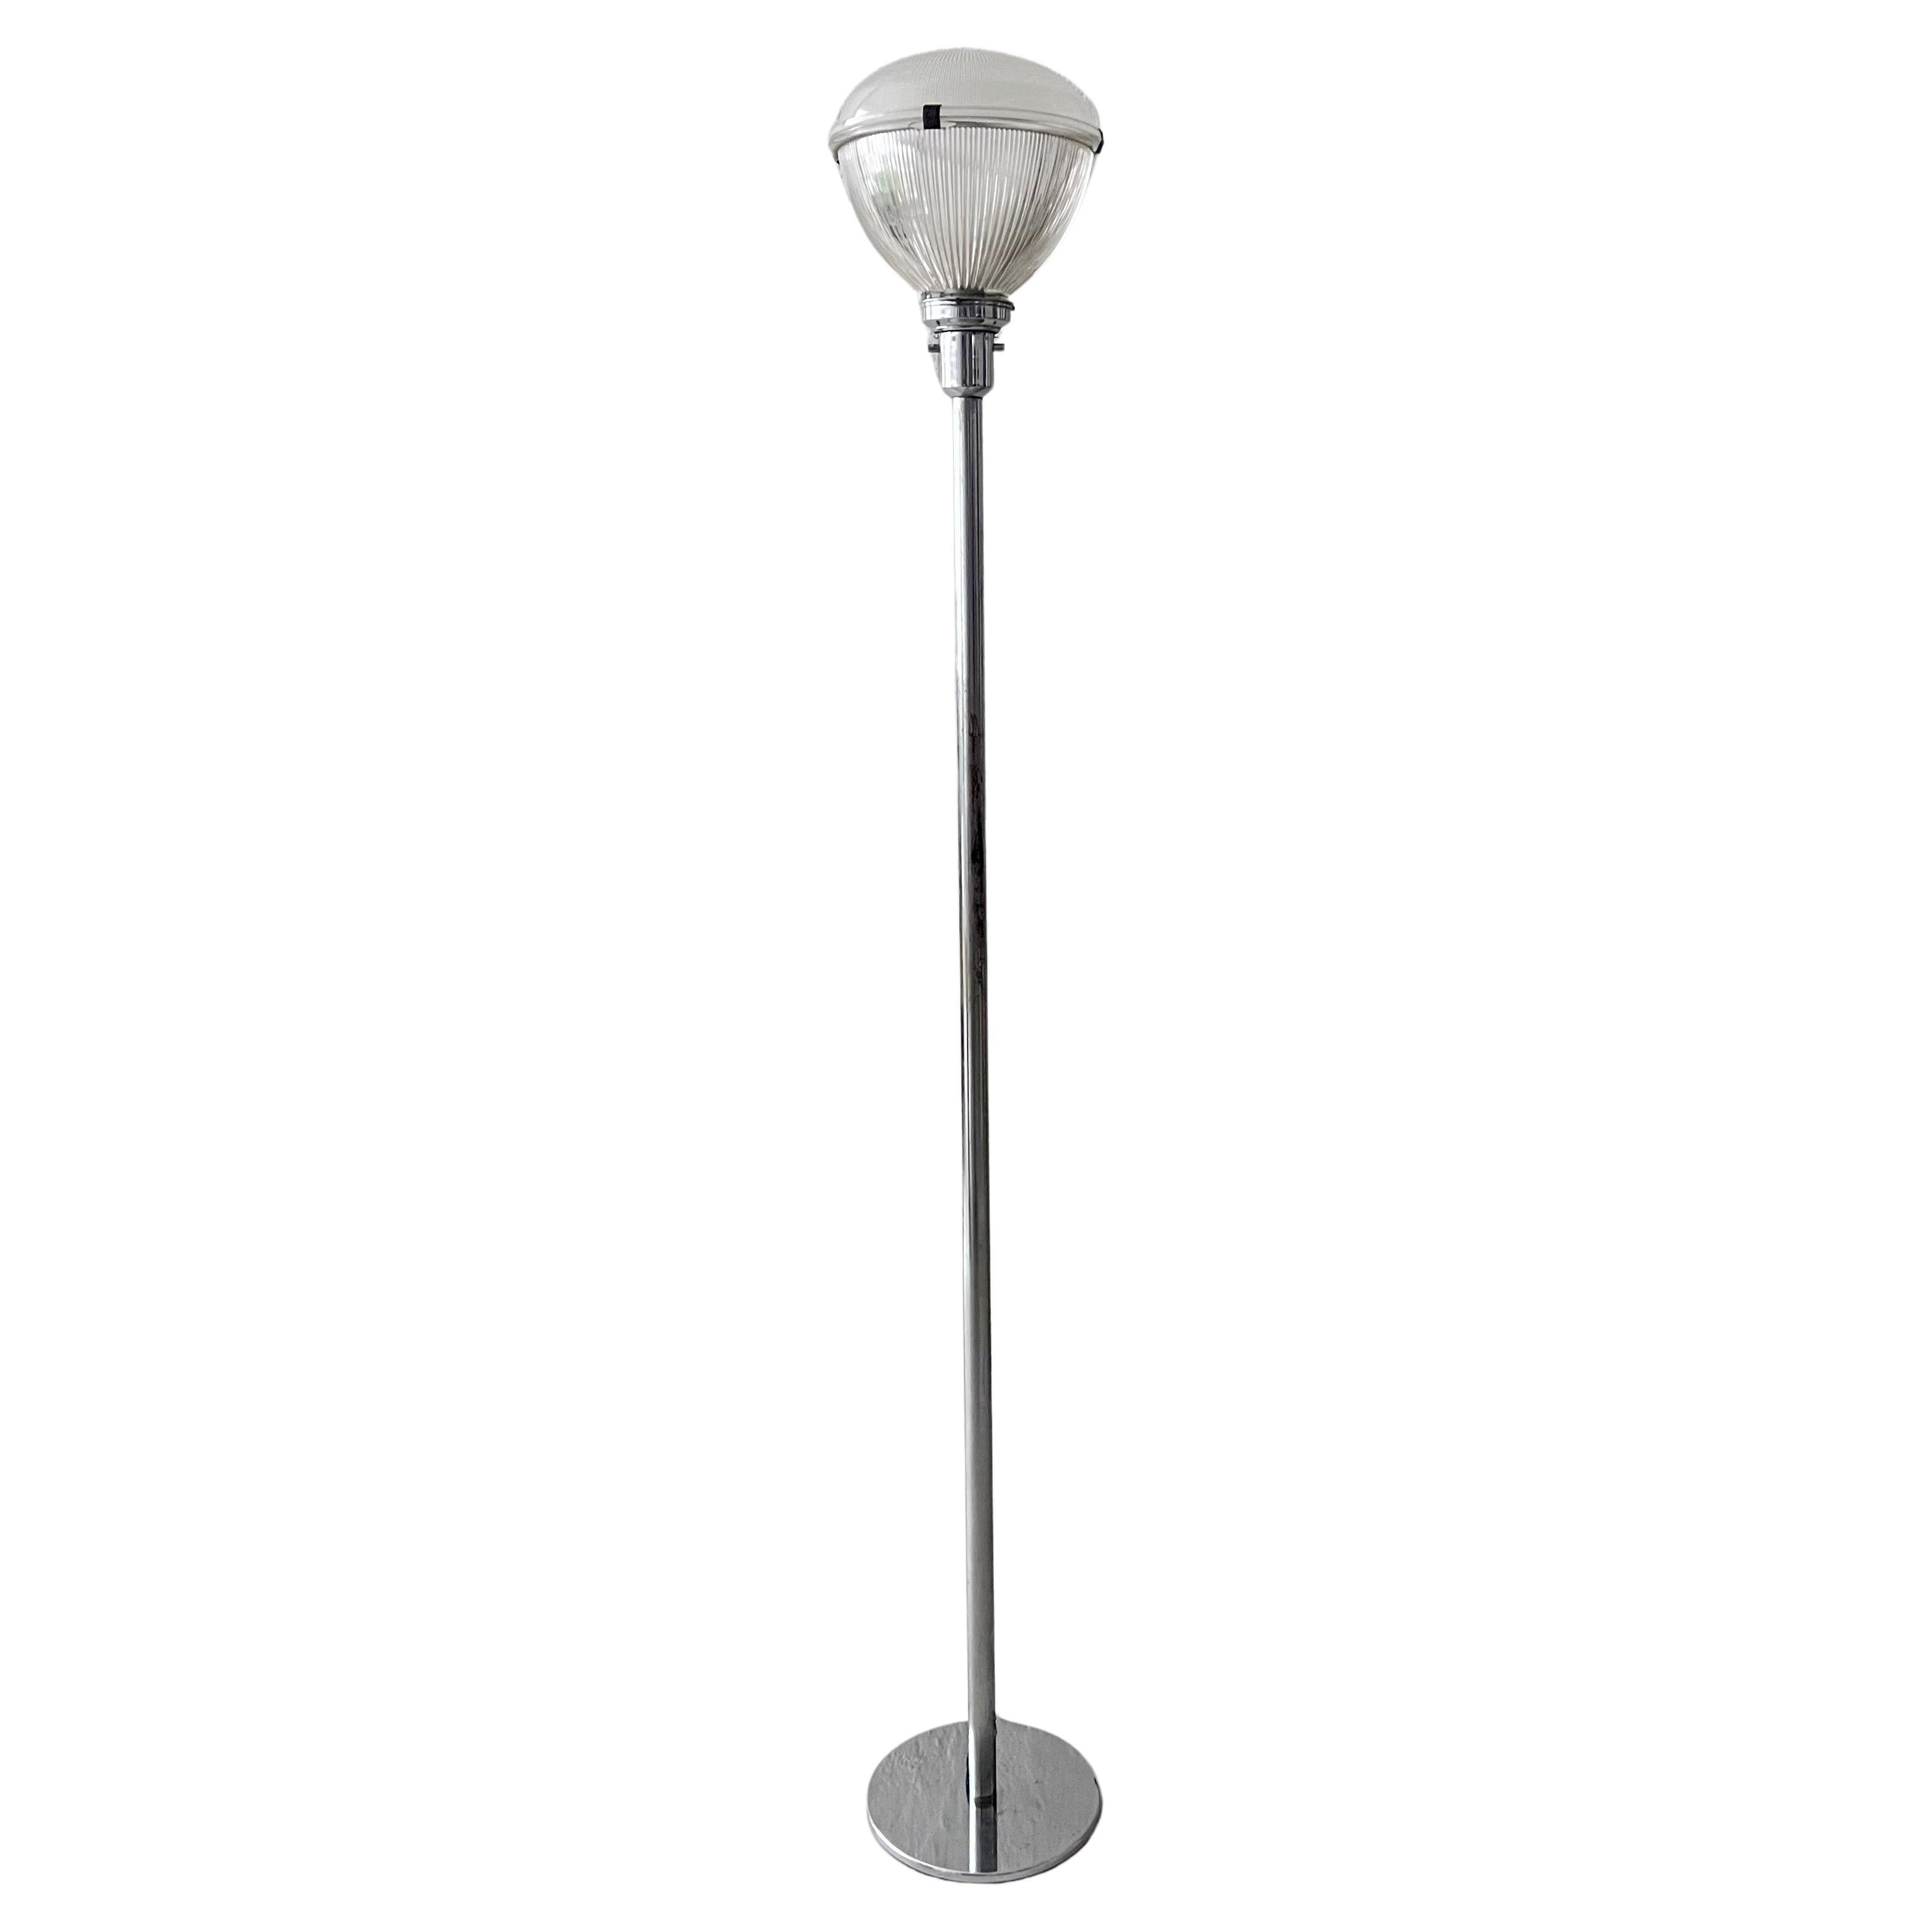 Chromed Floor Lamp from the 1960s, Made in Italy, Mid-Century Modern Era For Sale